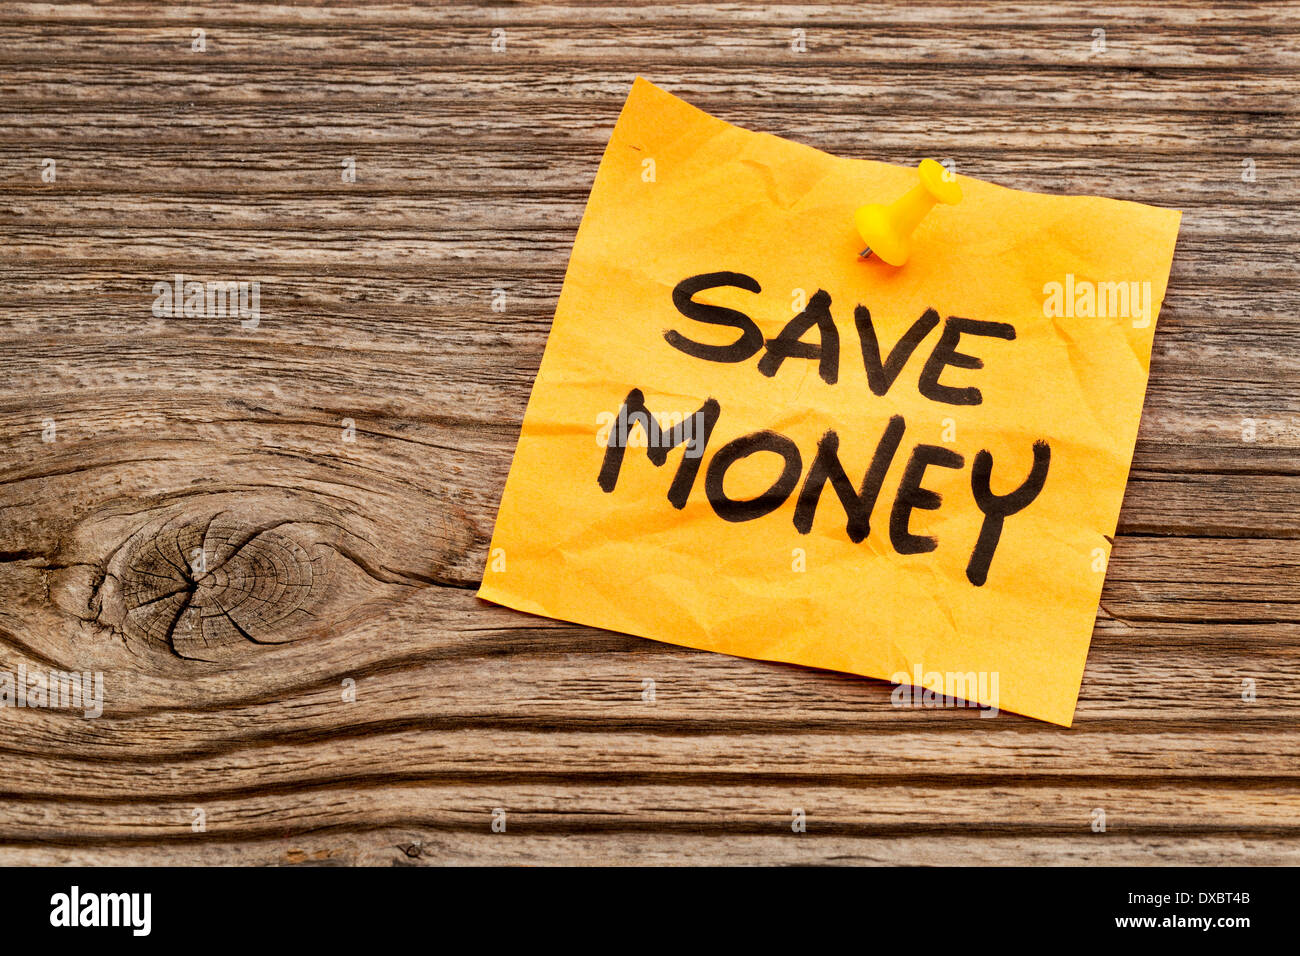 save money yellow reminder note against grained wood Stock Photo